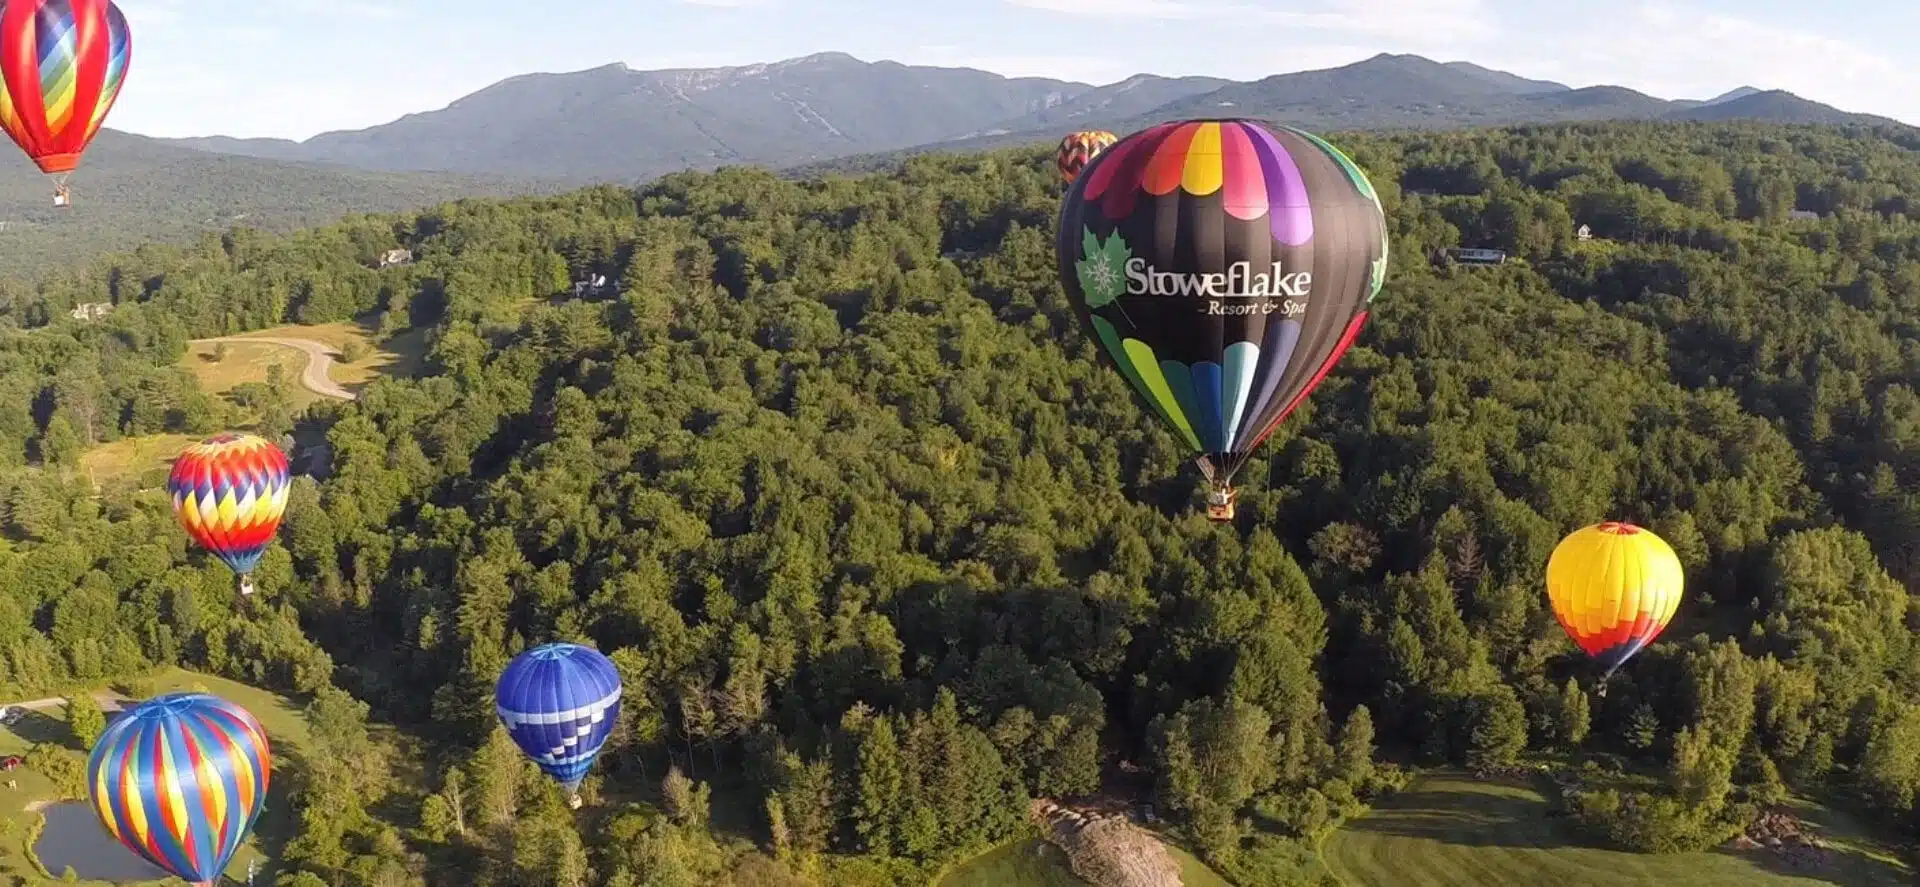 several colorful balloons in the air at the Stoweflake Hot Air Balloon Festival Stowe Vermont